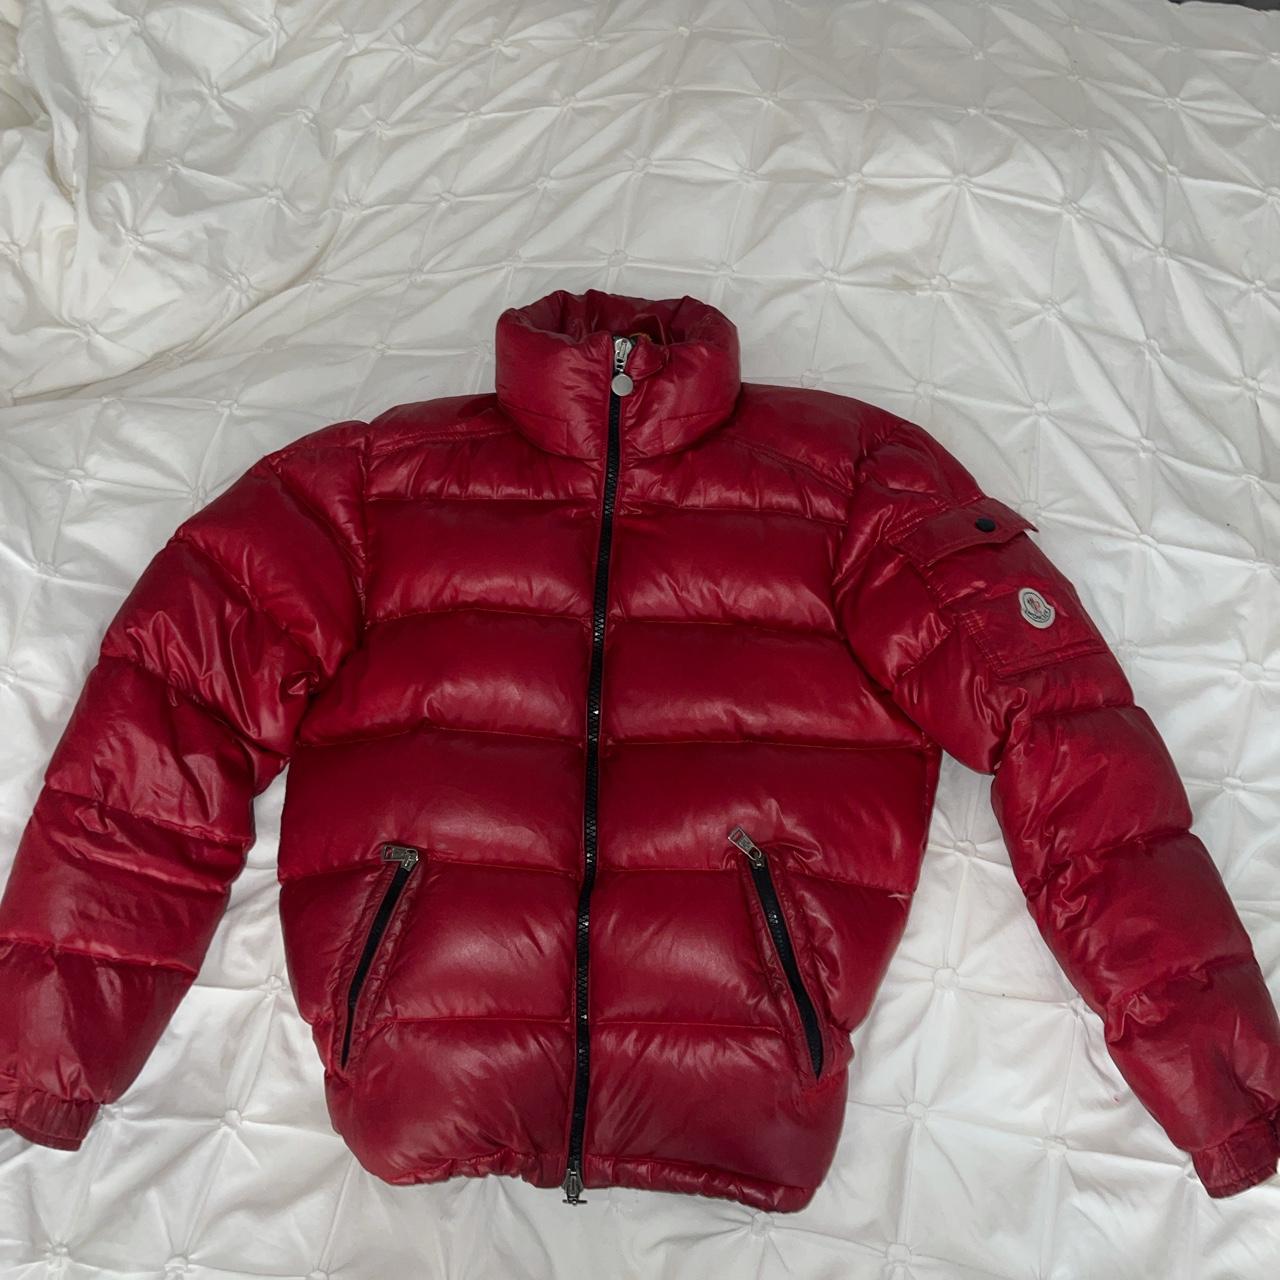 Maya Red Moncler Puffer Coat. Well worn with a small... - Depop